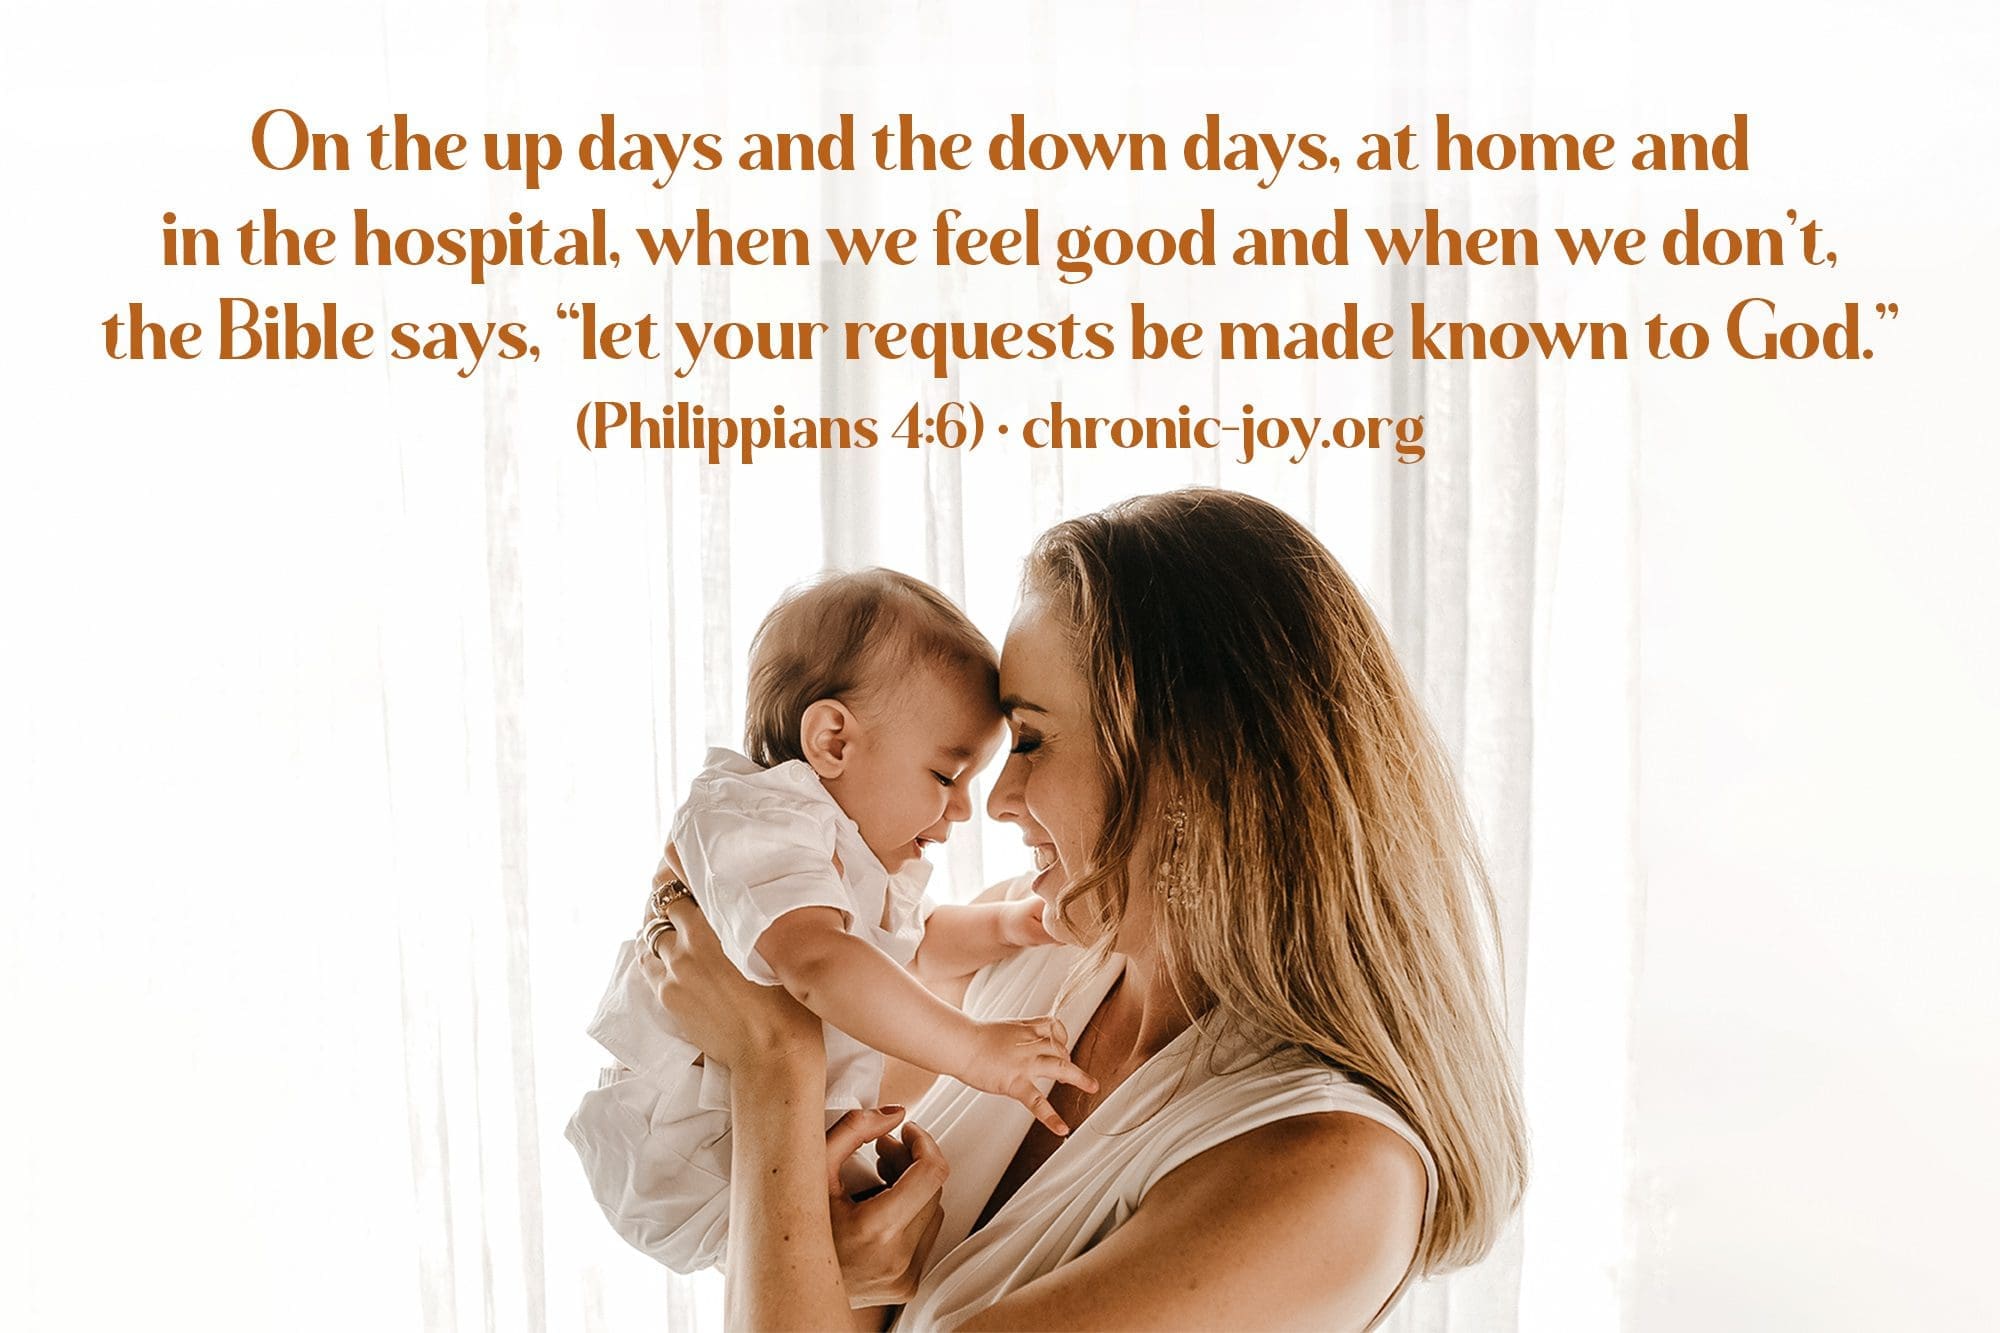 "On the up days and the down days, at home and in the hospital, when we feel good and when we don't, the Bible says, "let your requests be made known to God." (Philippians 4:6)